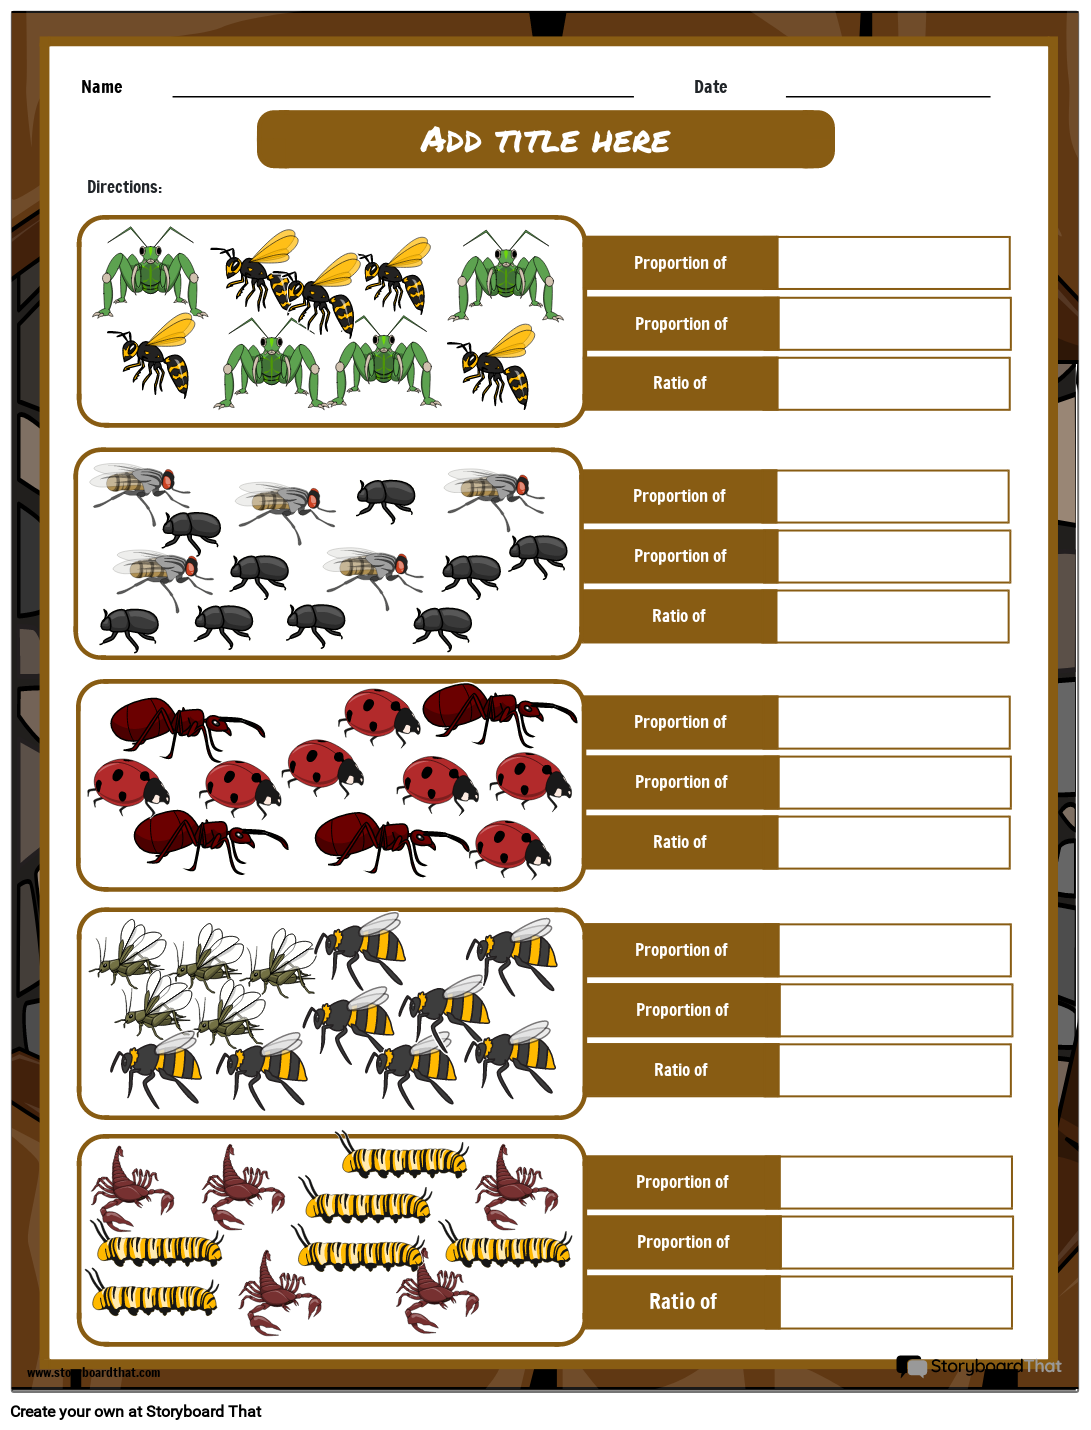 Insects-themed Proportion Handout - Answers Rounded